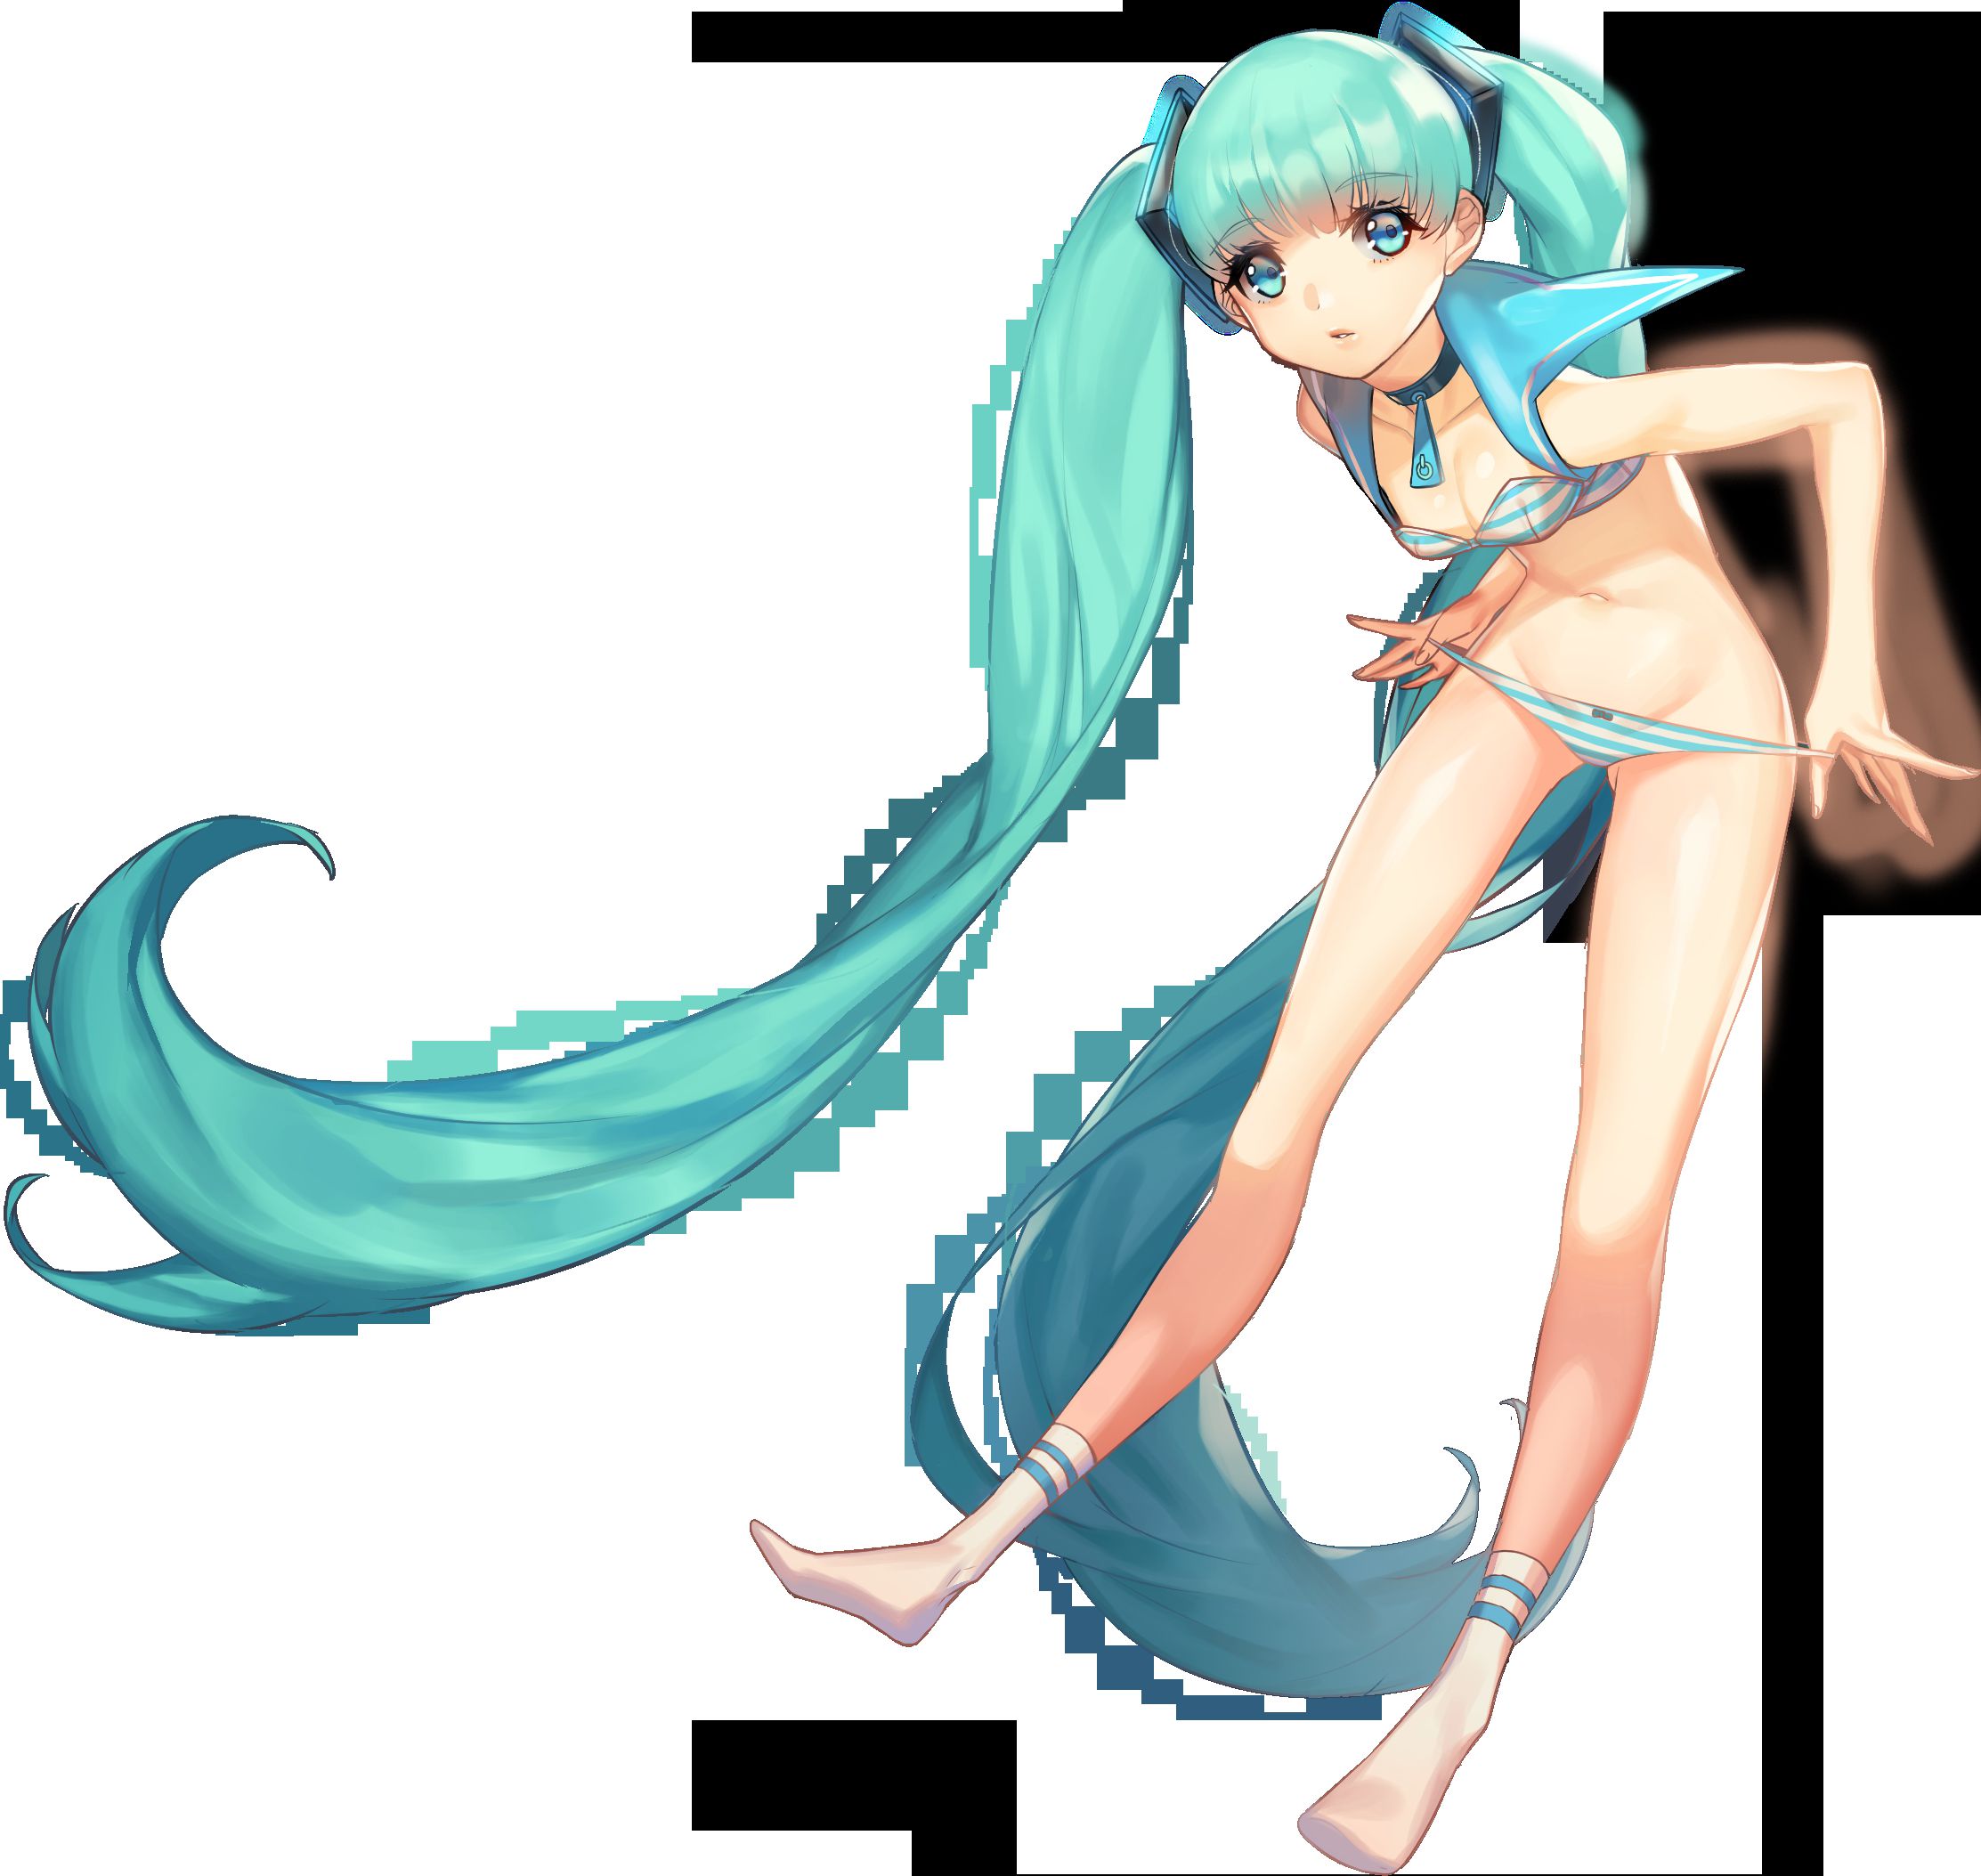 Assorted Miku images after a long absence. 14